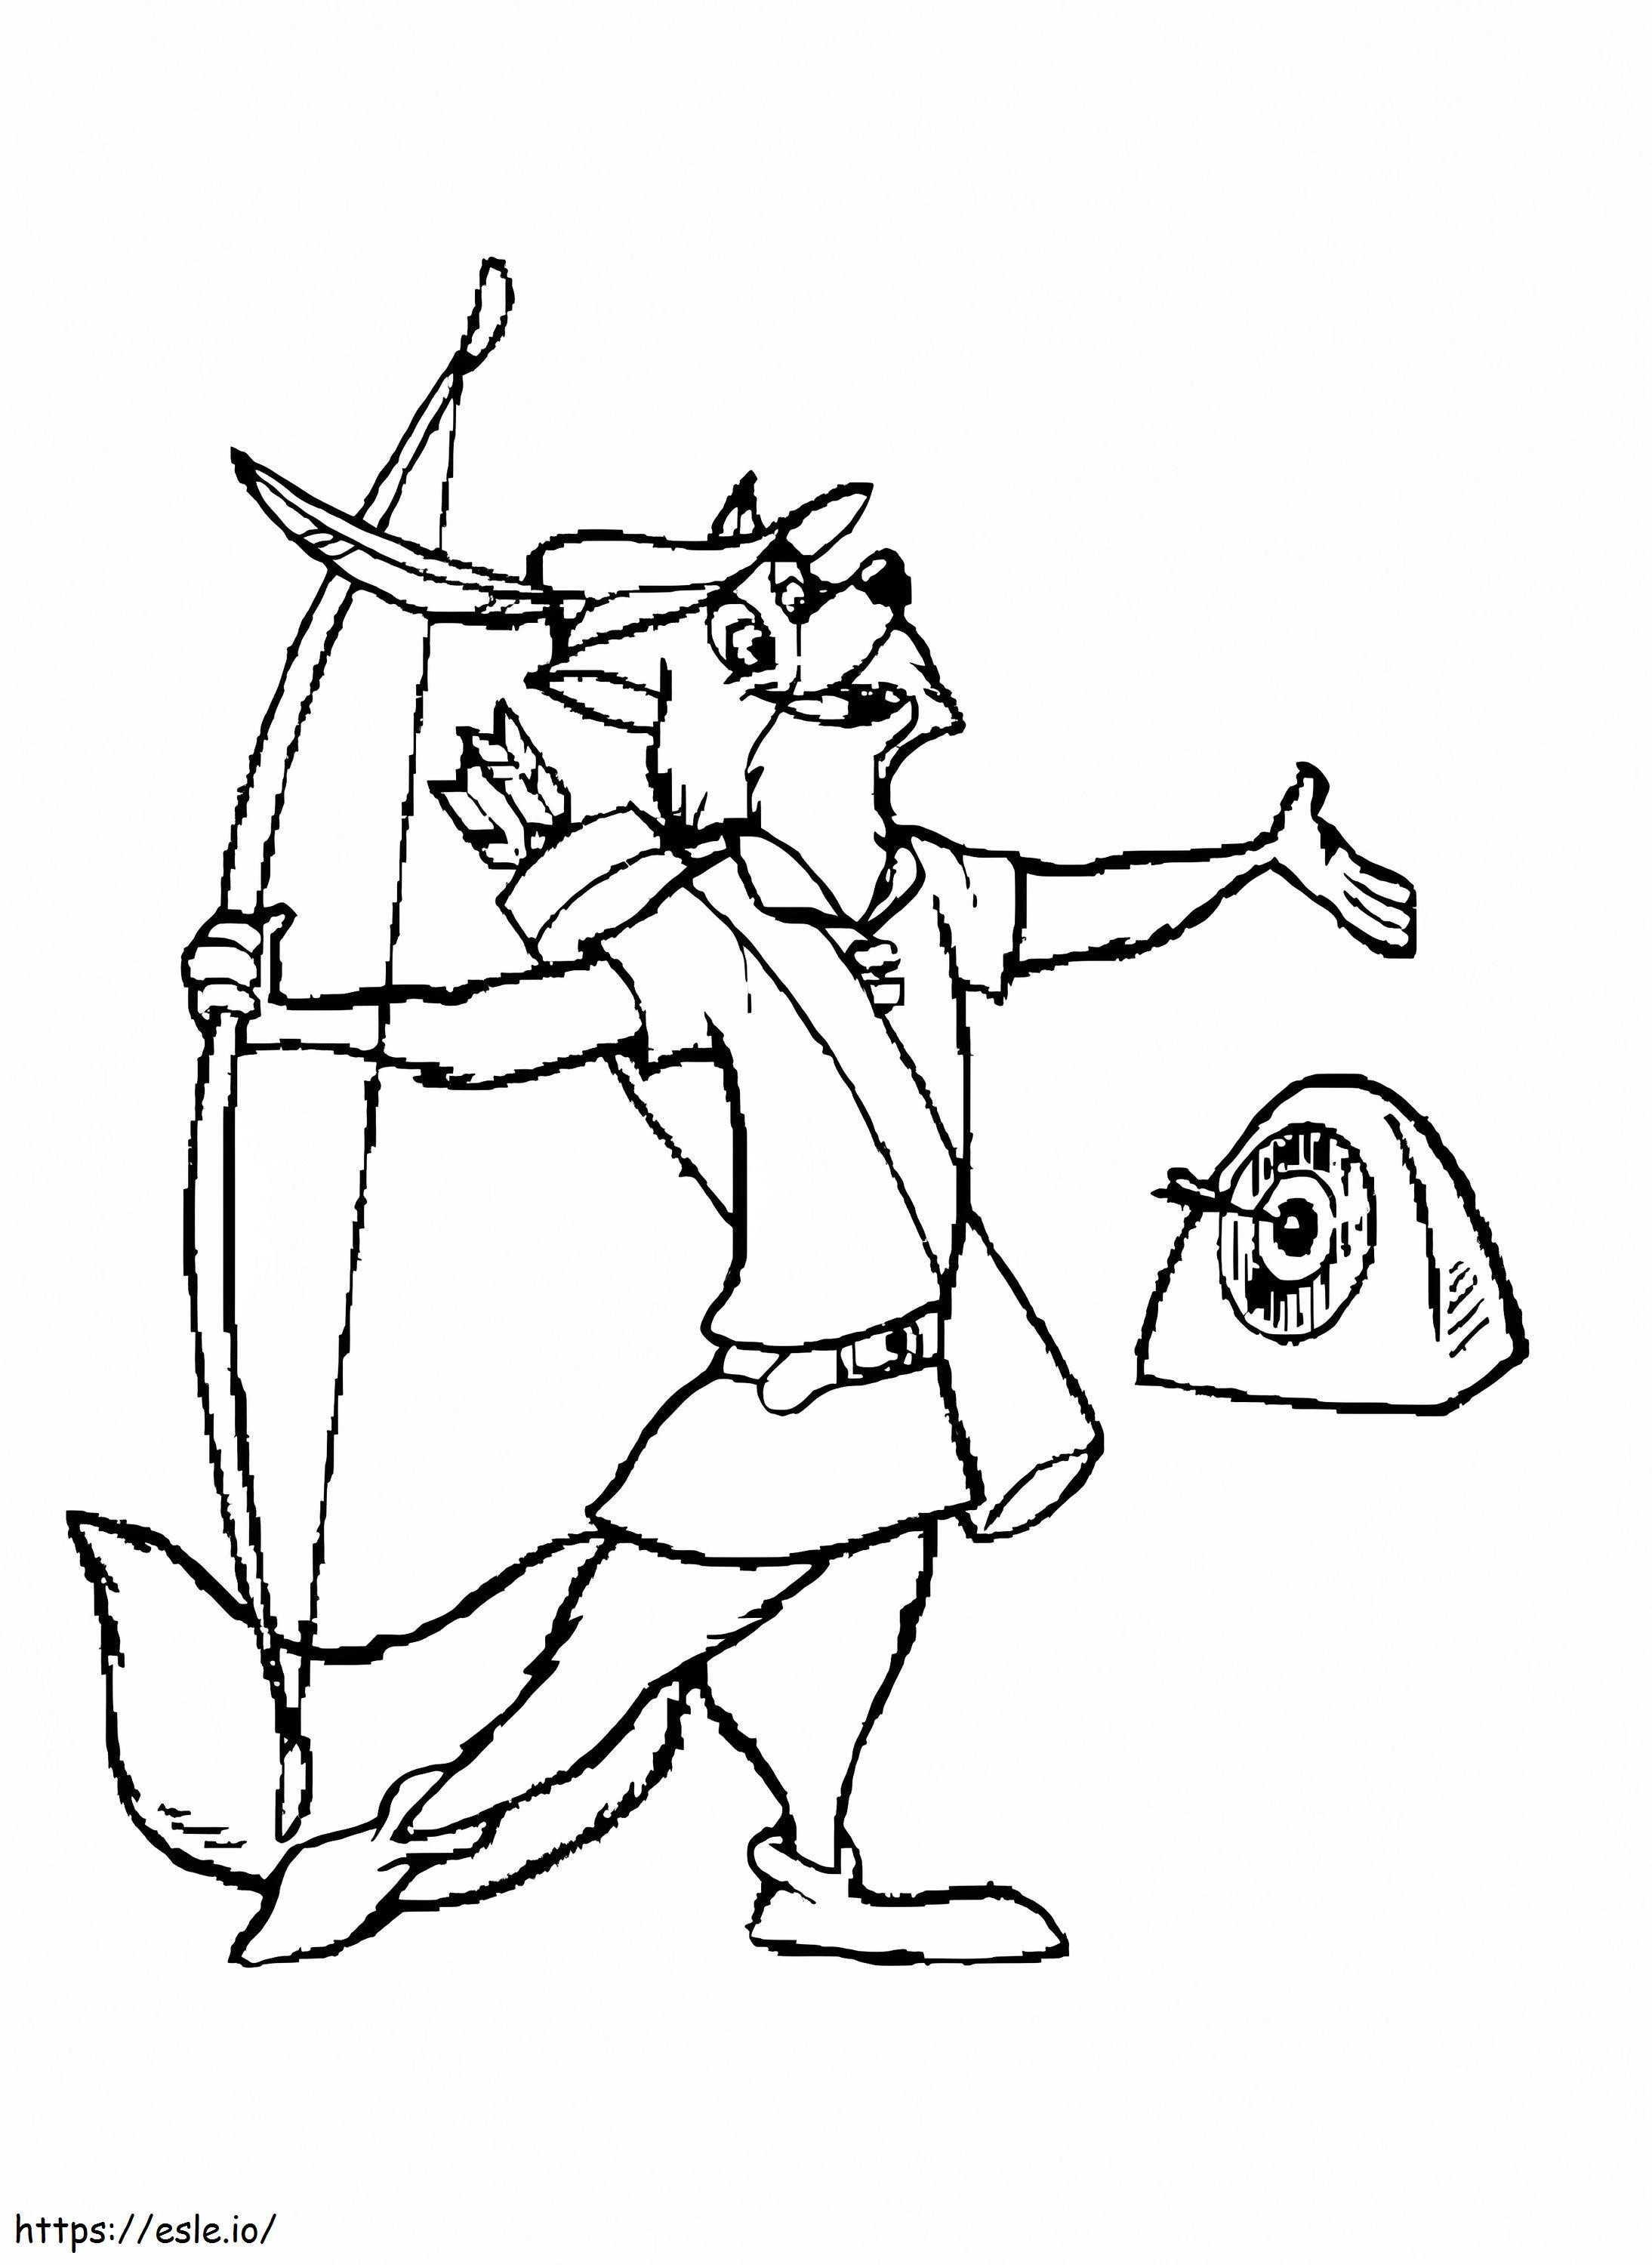 Robin Hood 11 coloring page